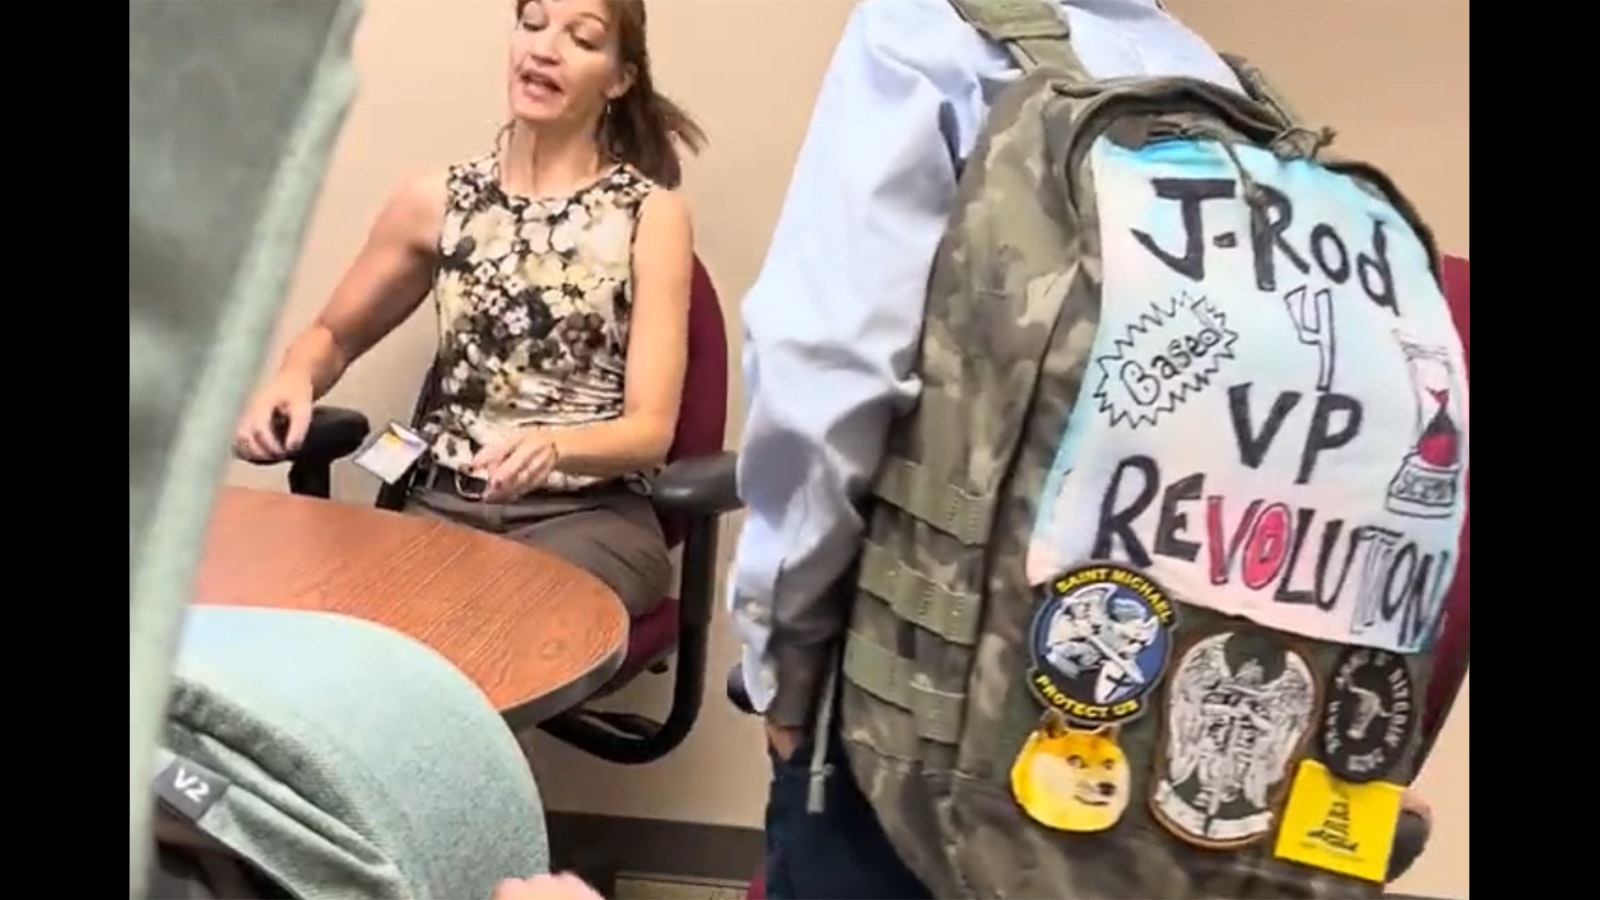 Colorado Springs boy not backing down from wearing symbolic patch to school